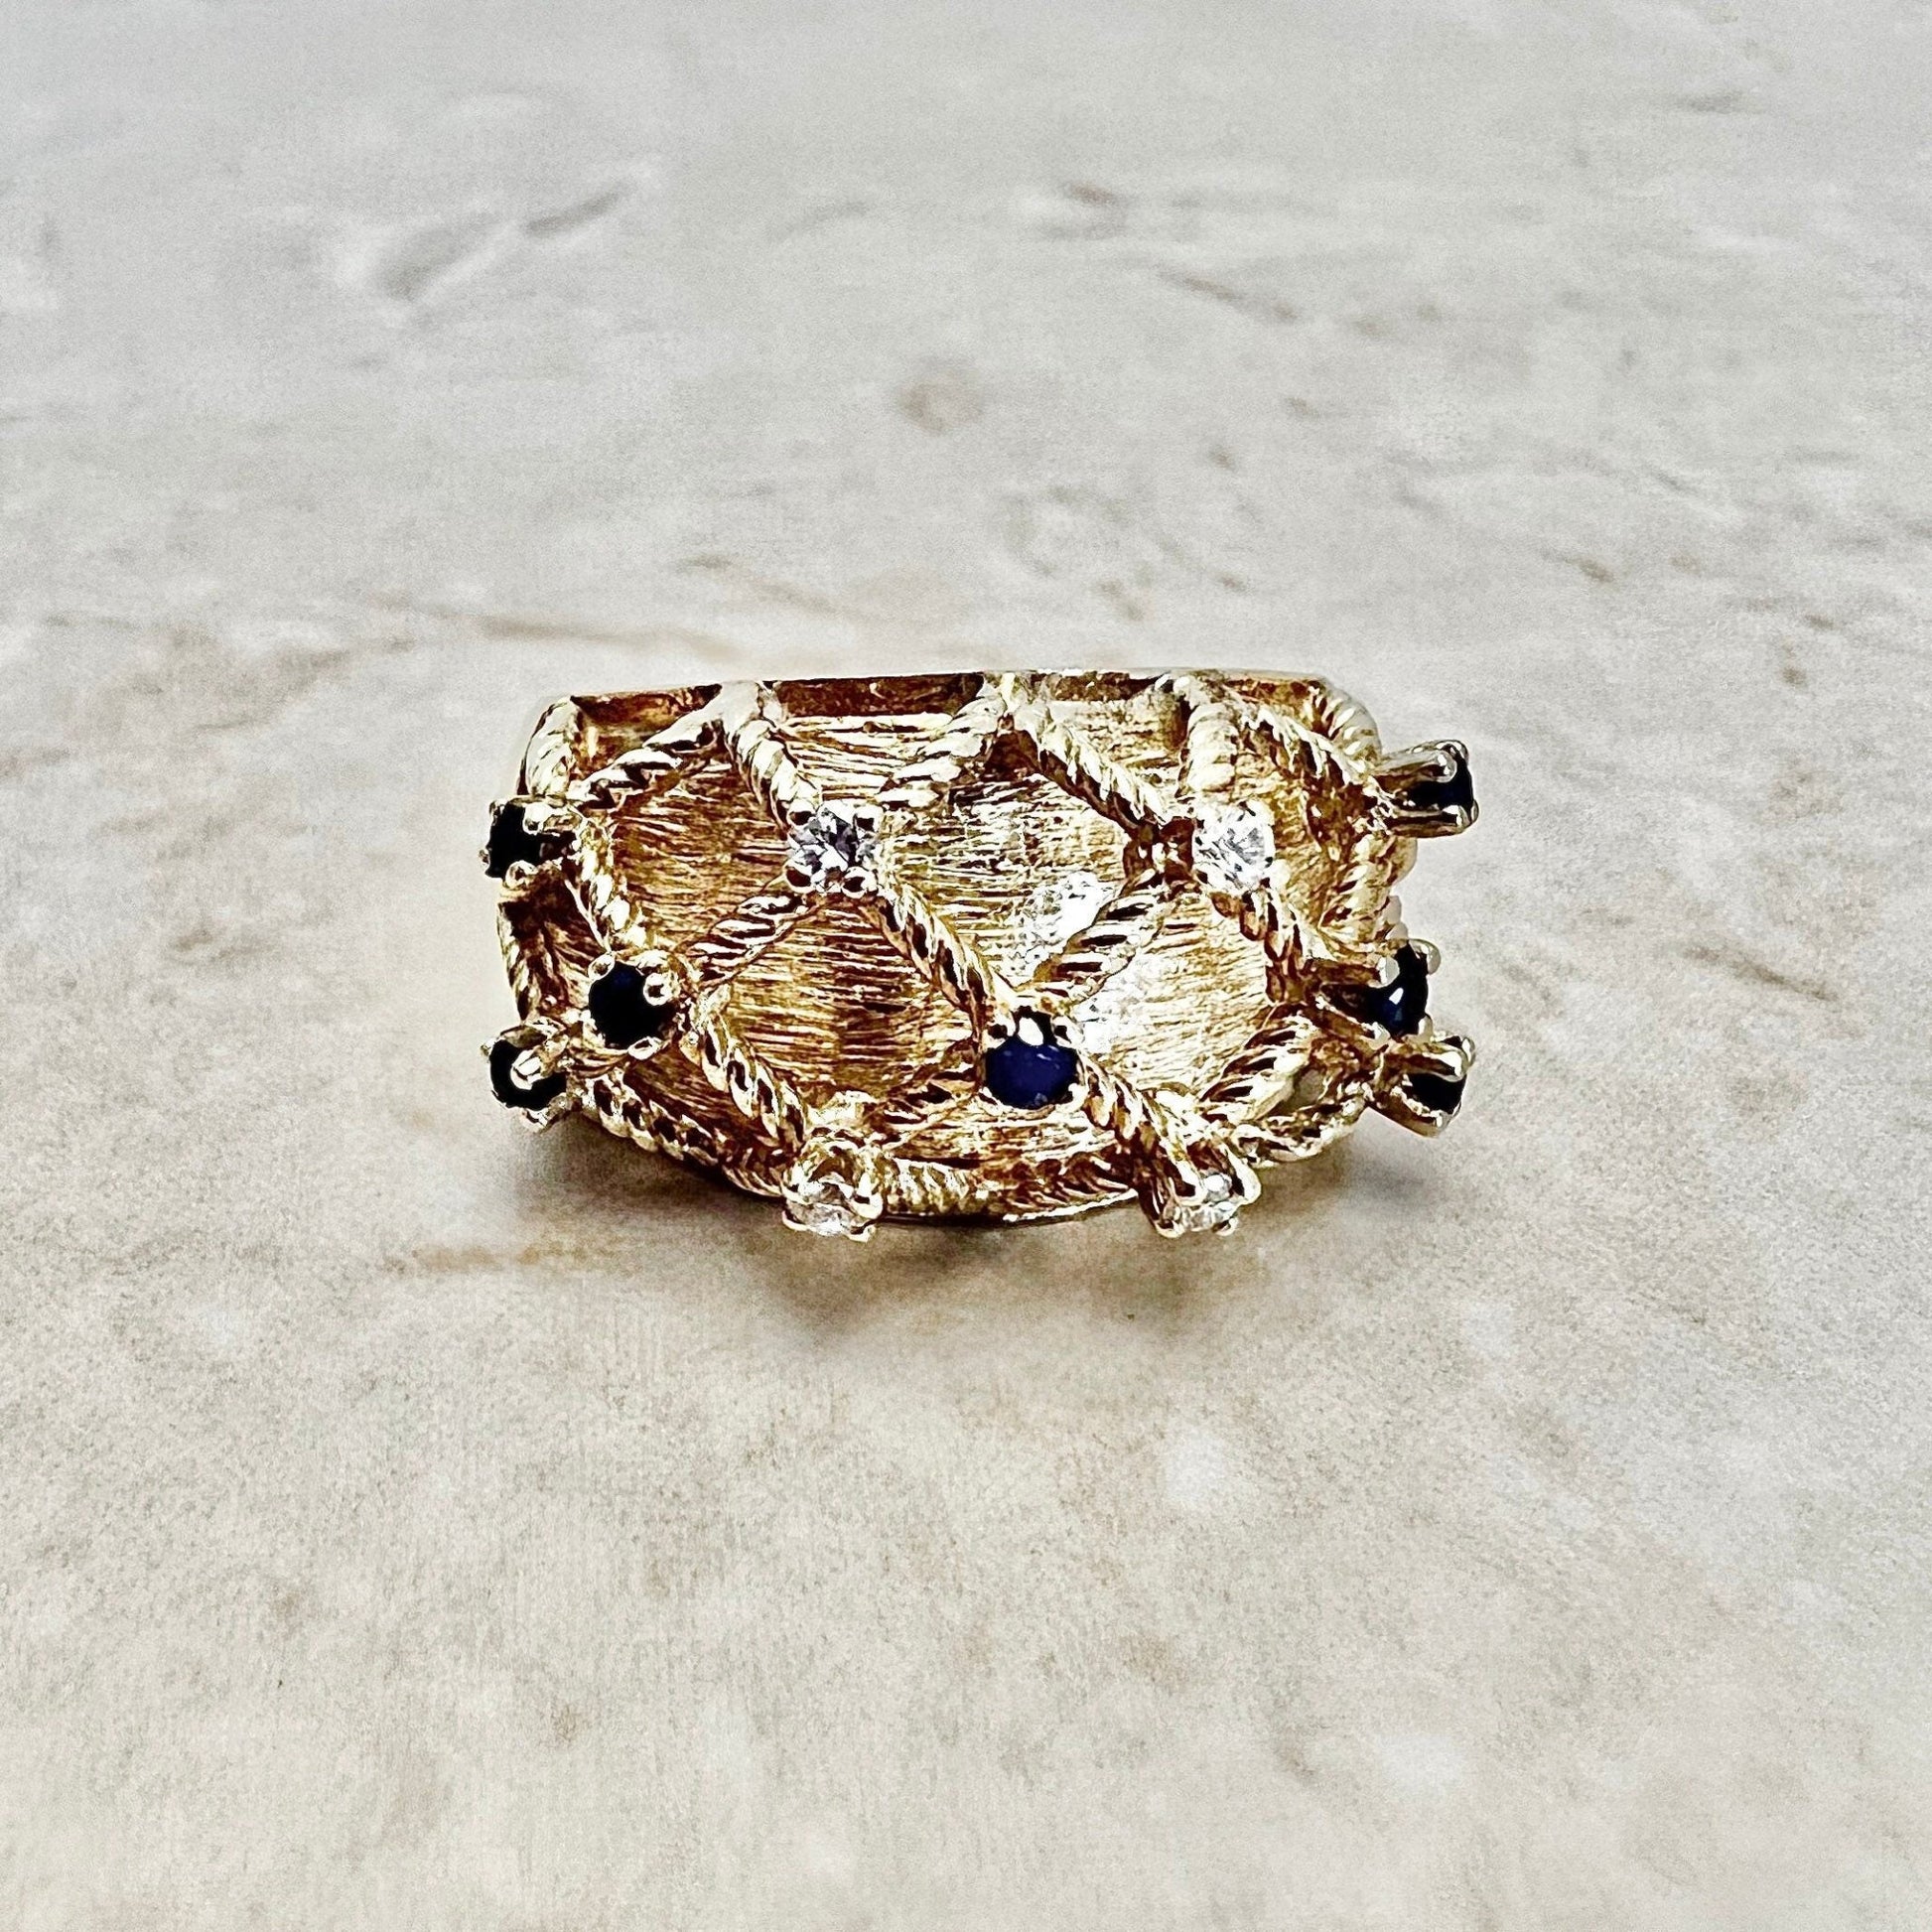 CLEARANCE 40% OFF - Vintage 14 Karat Yellow Gold Natural Sapphire & Diamond Cocktail Ring - WeilJewelry